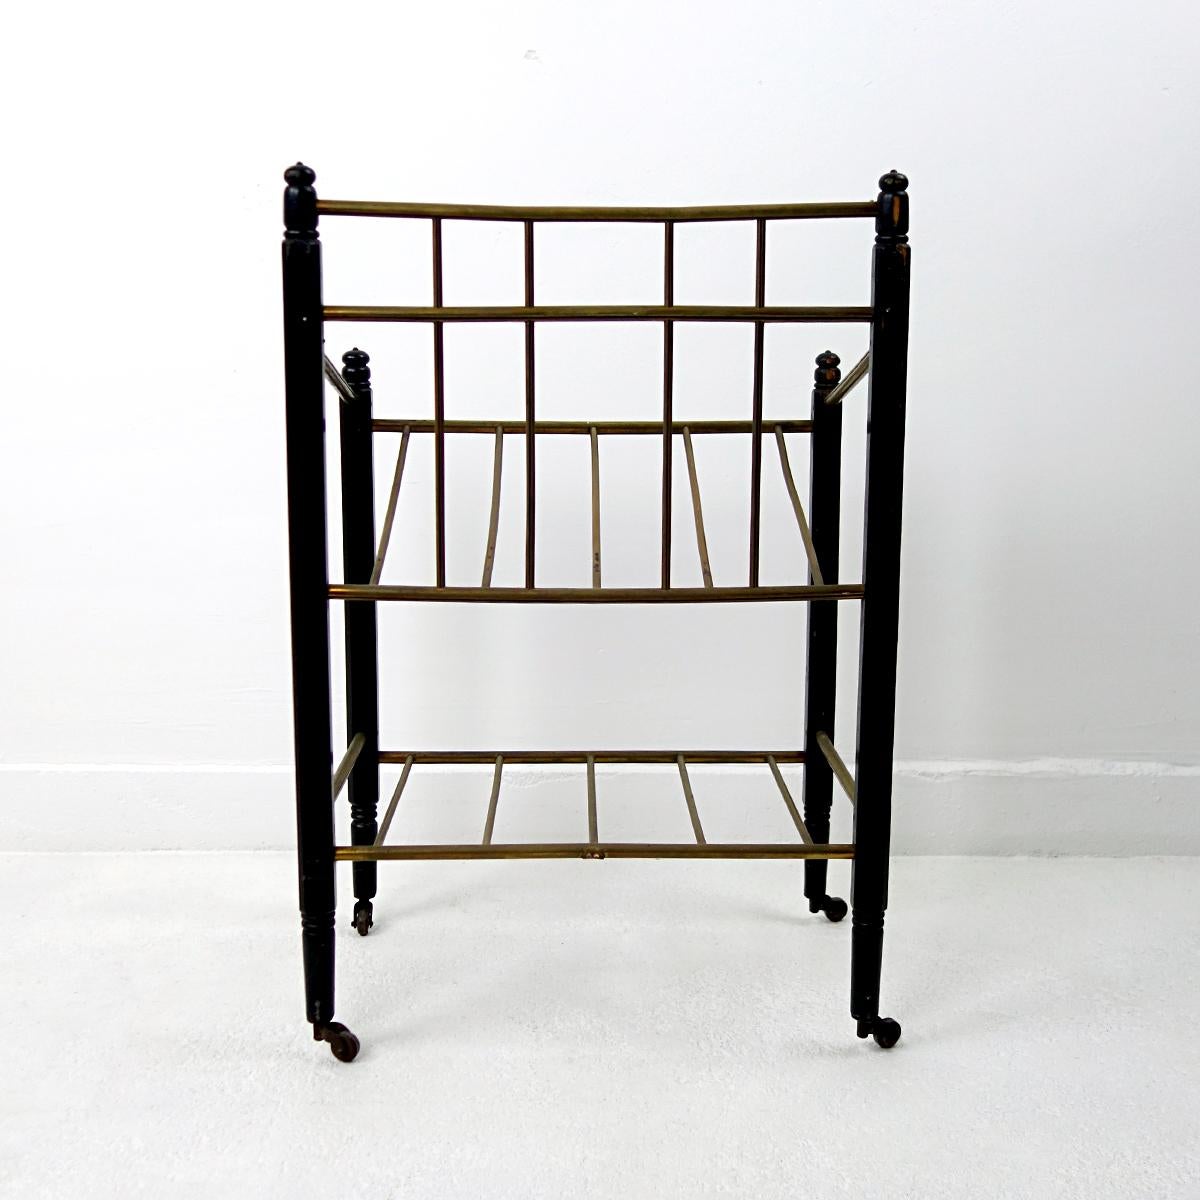 20th Century Art Deco Wood and Brass Magazine Stand on Wheels by Ernst Rockhausen & Söhne For Sale